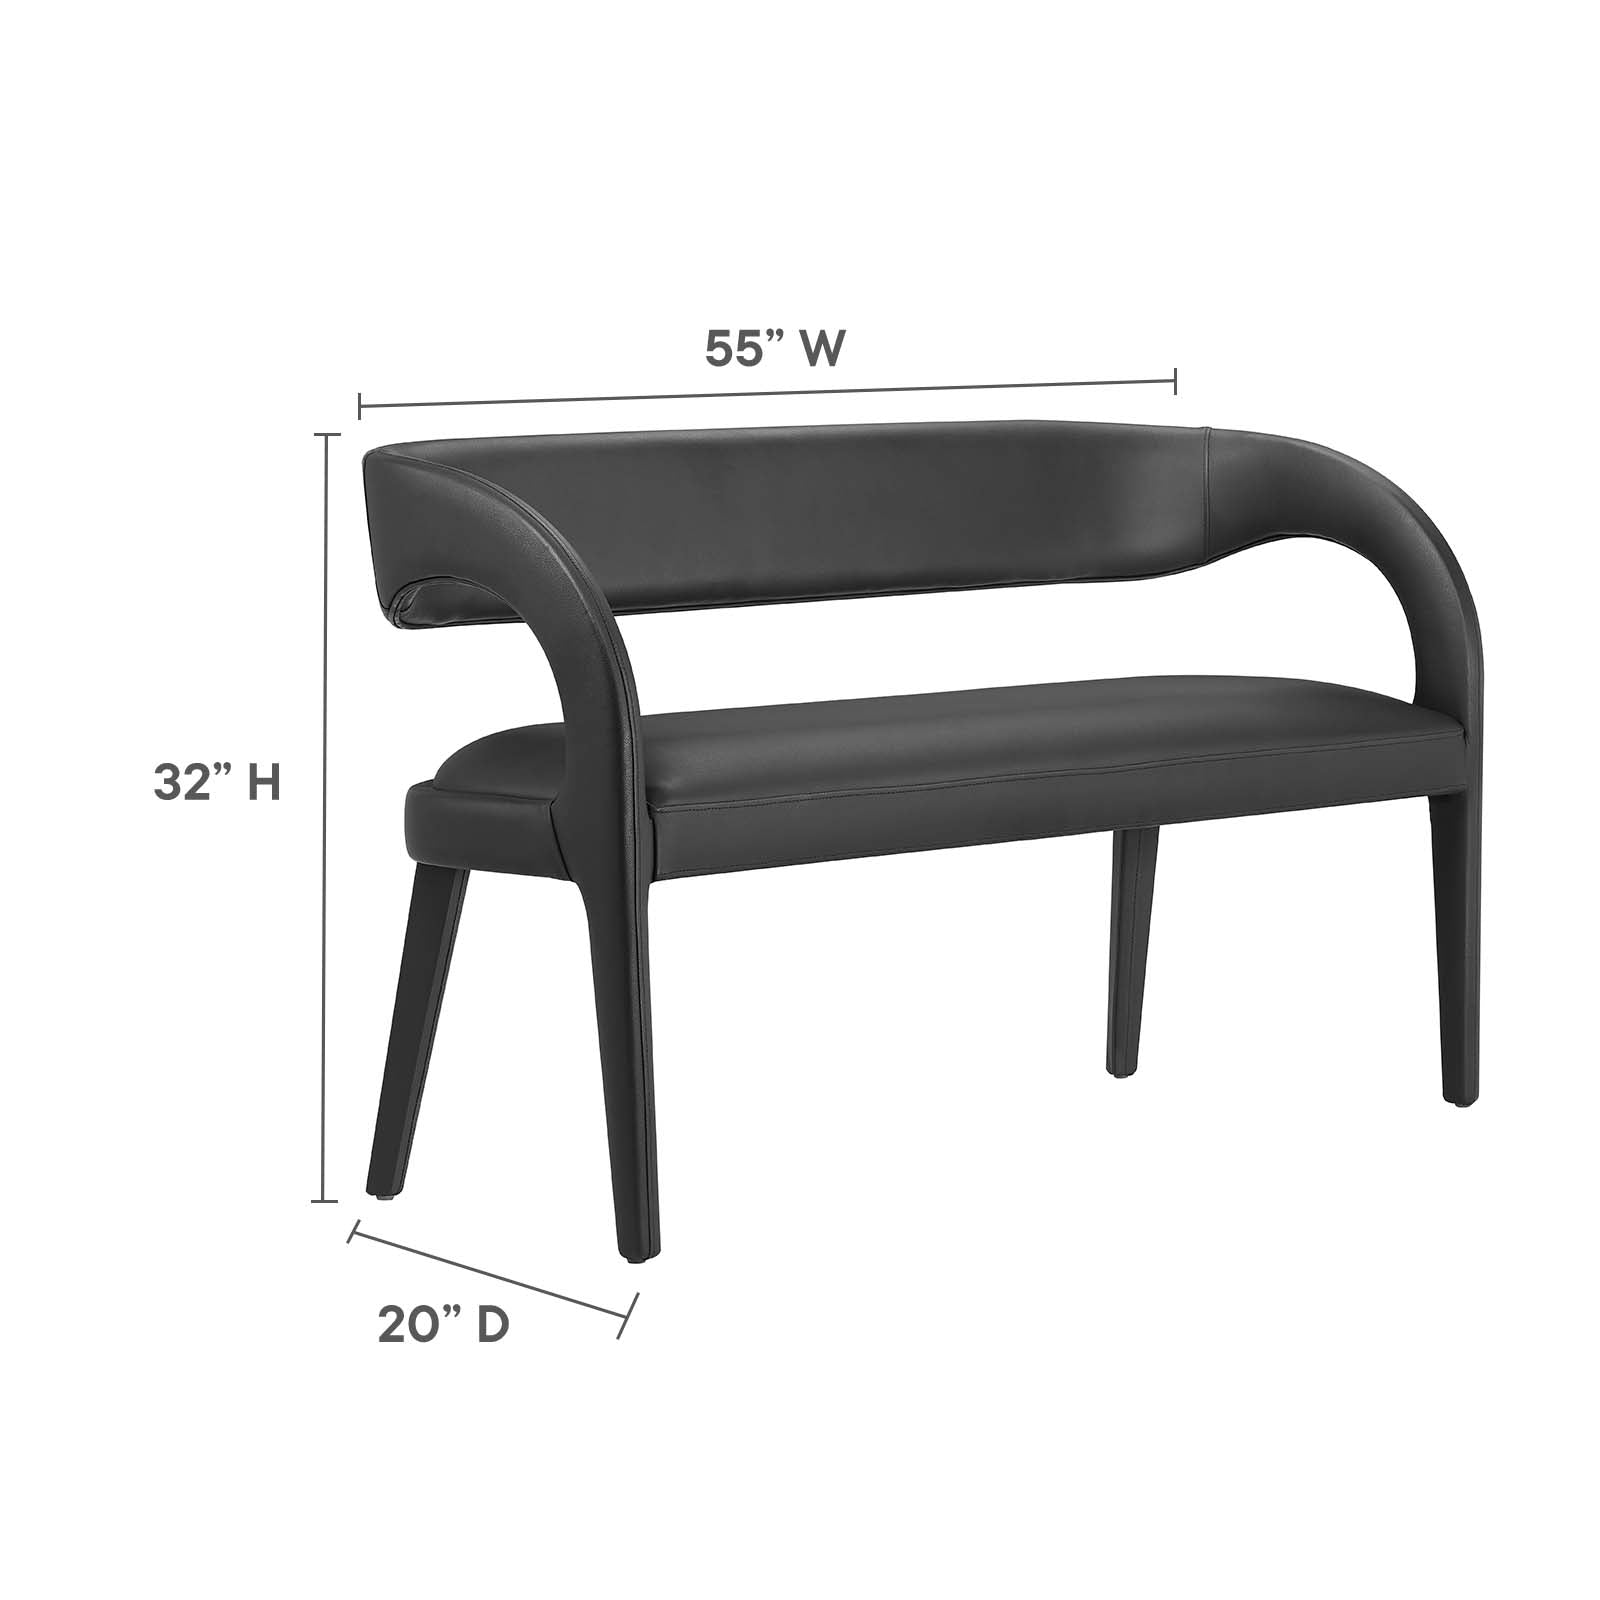 Pinnacle Vegan Leather Accent Bench - East Shore Modern Home Furnishings